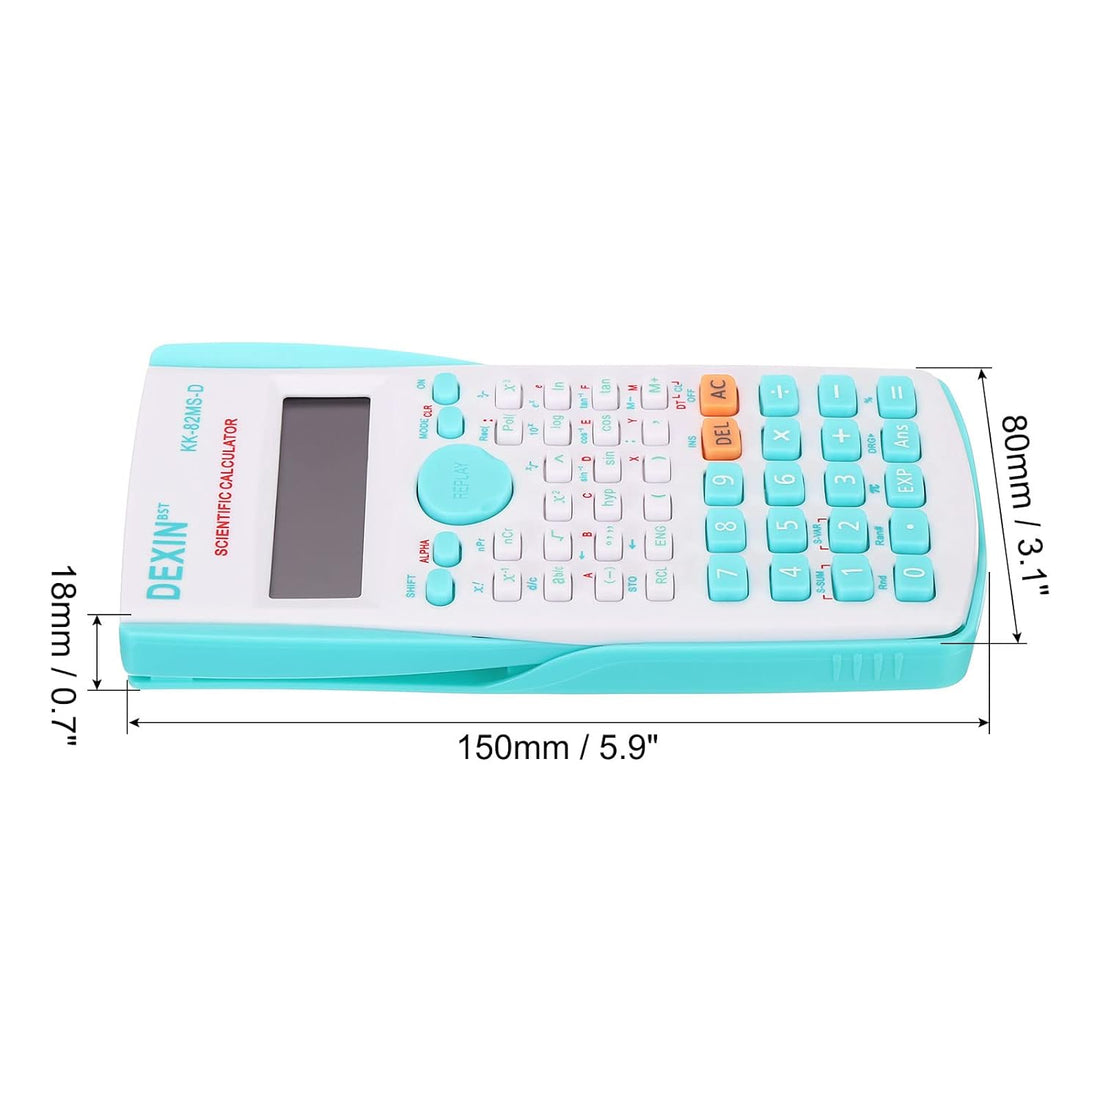 PATIKIL Scientific Calculator, 2-Line Standard Engineering Calculator with 240 Function 12 Digit LCD Display Math Calculator for Office Business, Green